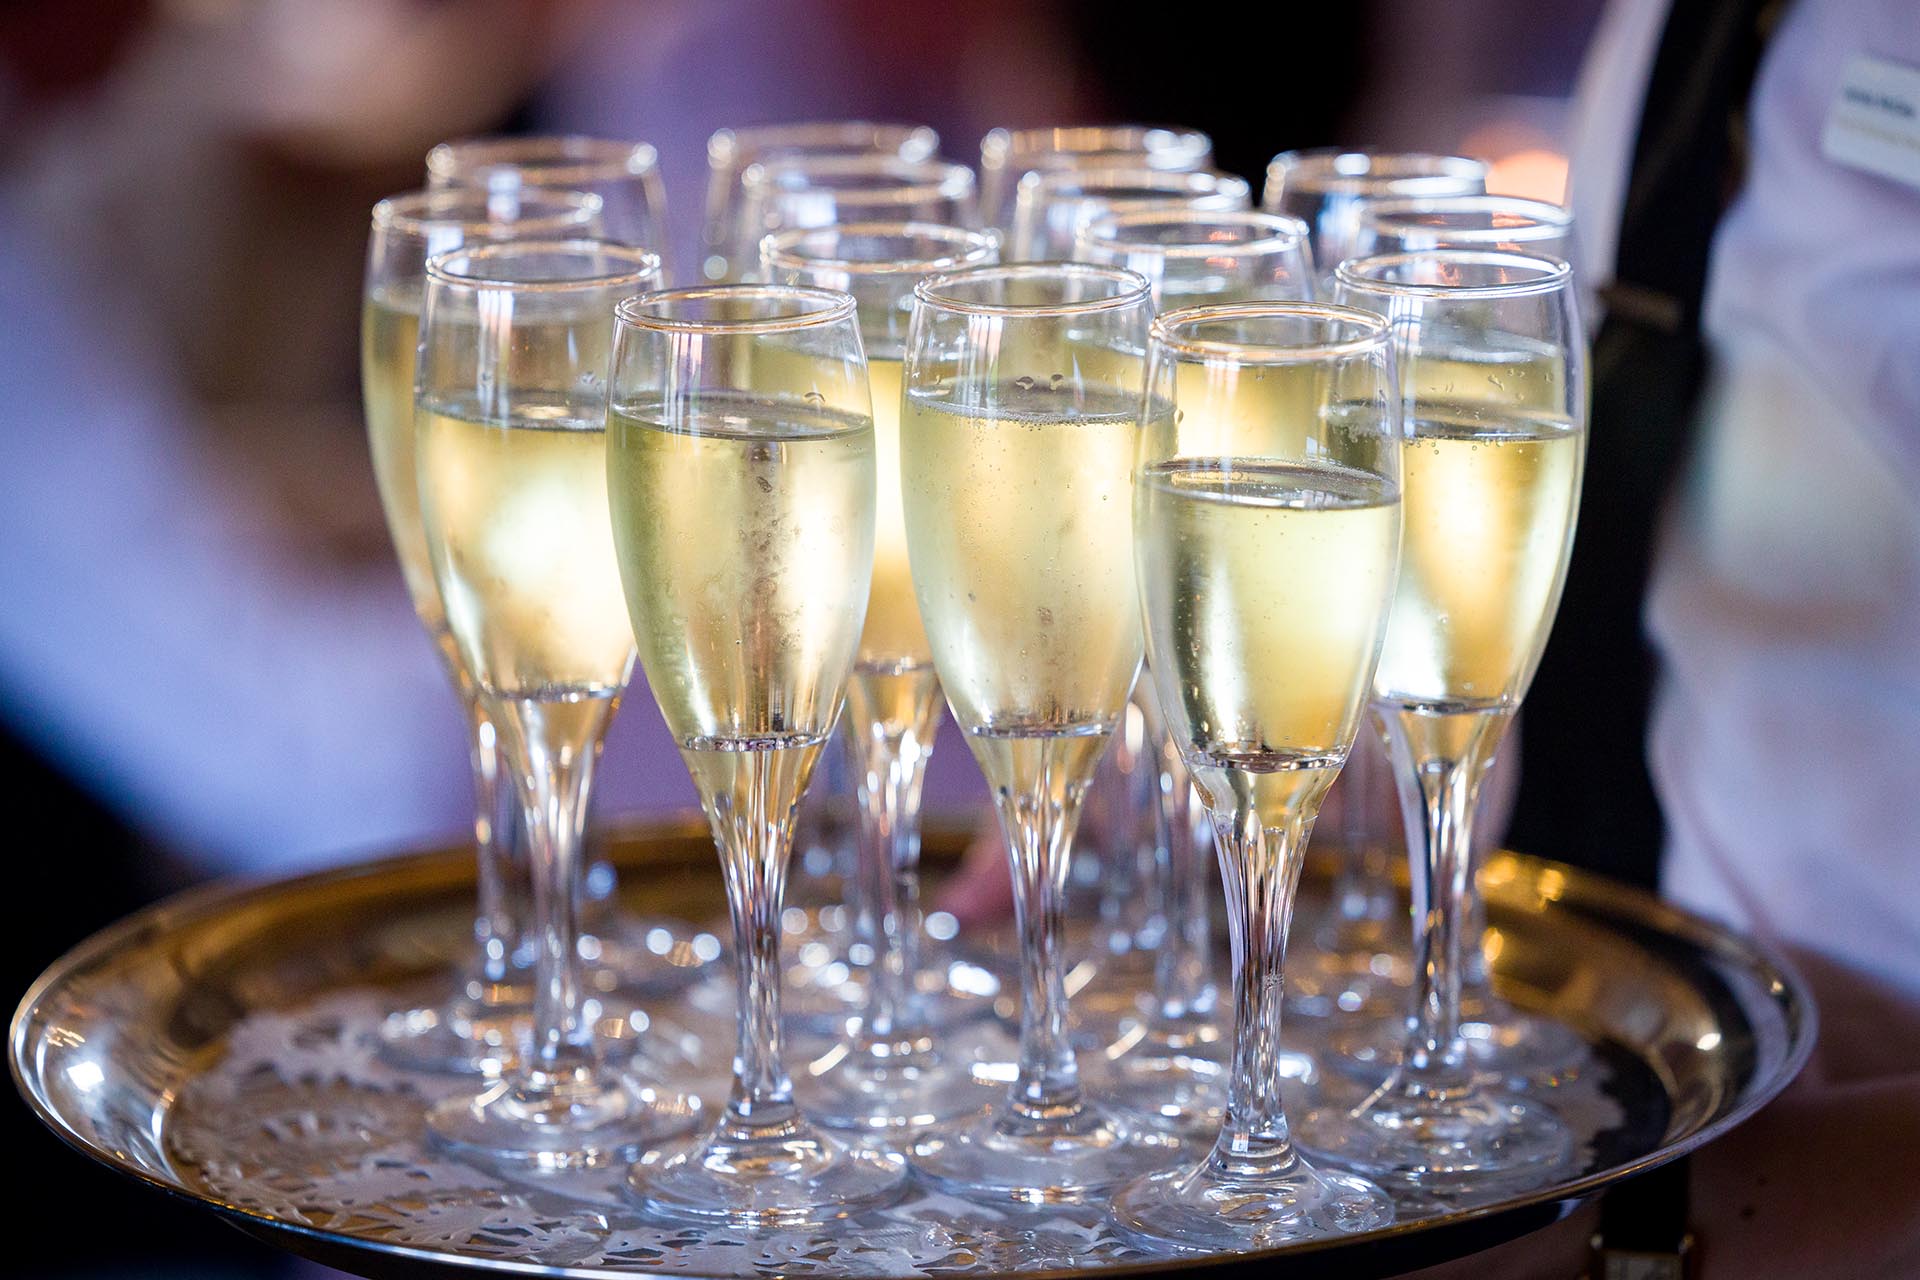 Champagne glasses by Essex wedding photographer at Leez Priory Great Leighs Chelmsford